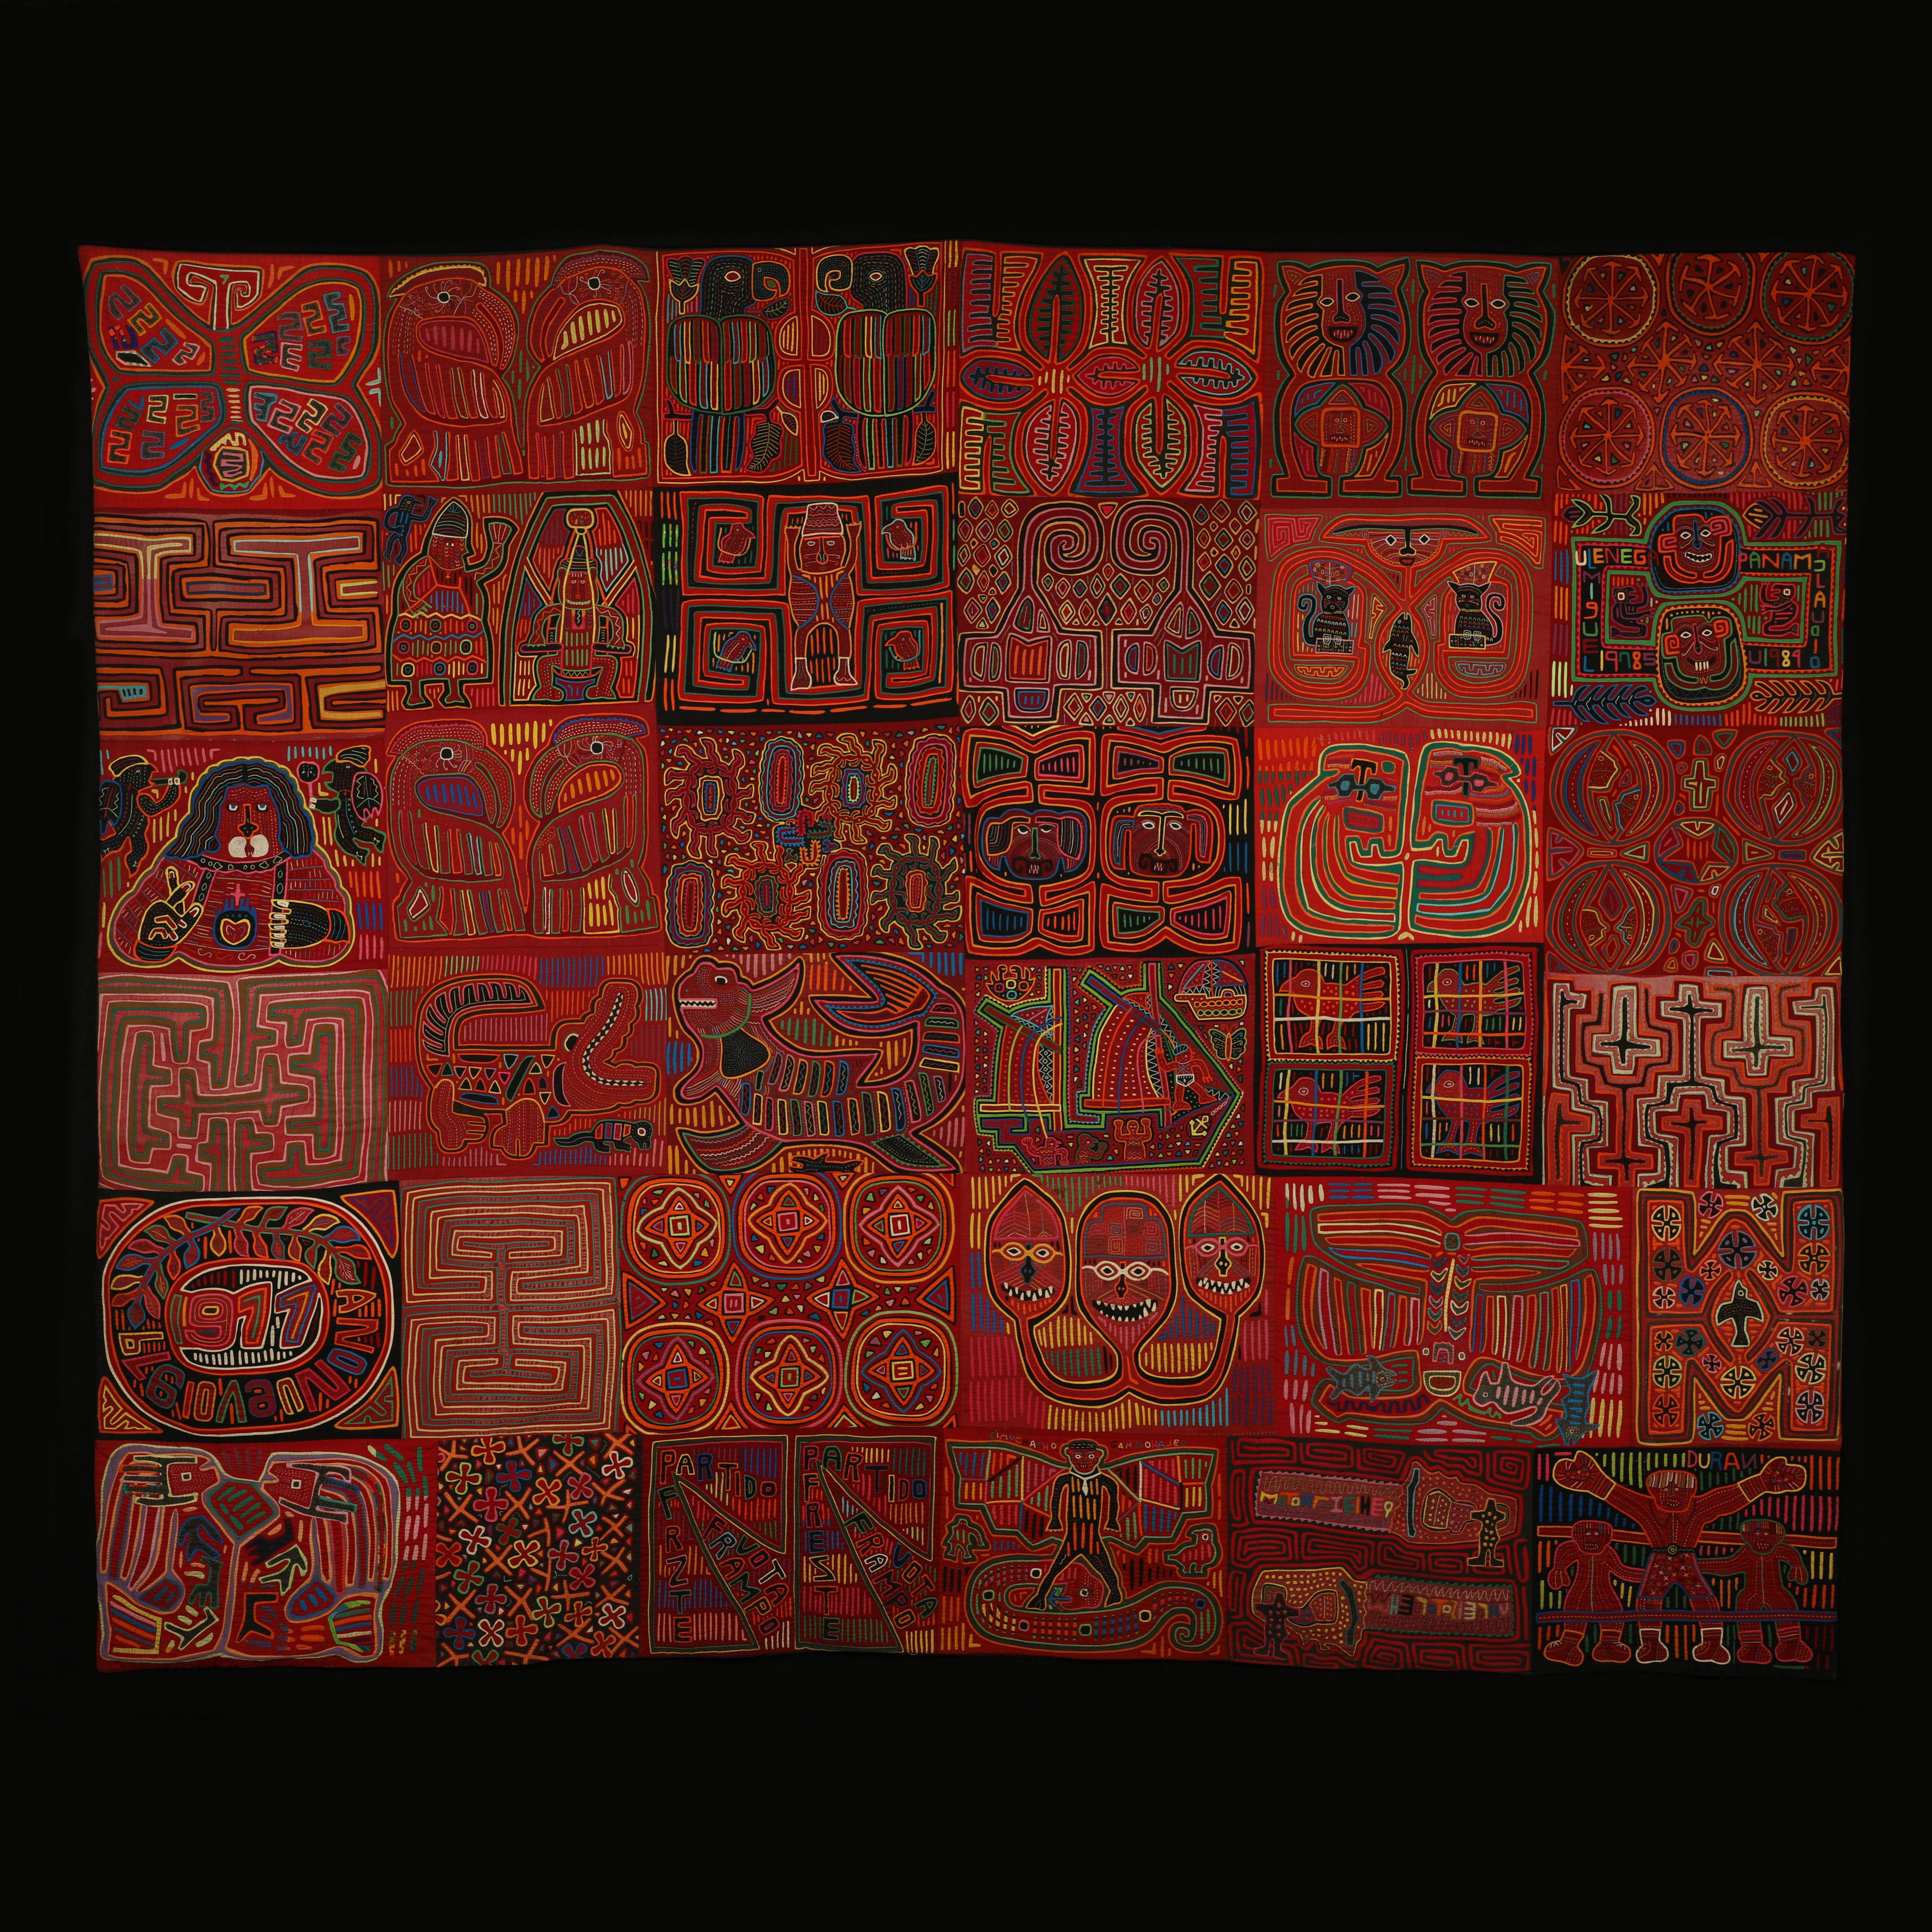 20th century Mola quilt, Kuna People, San Blas Islands, Panama

This large quilt is composed of thirty-six molas, including some depicting various animals and sea creatures, Jesus Christ, some boxers, ships, insects, and traditional abstract motifs.